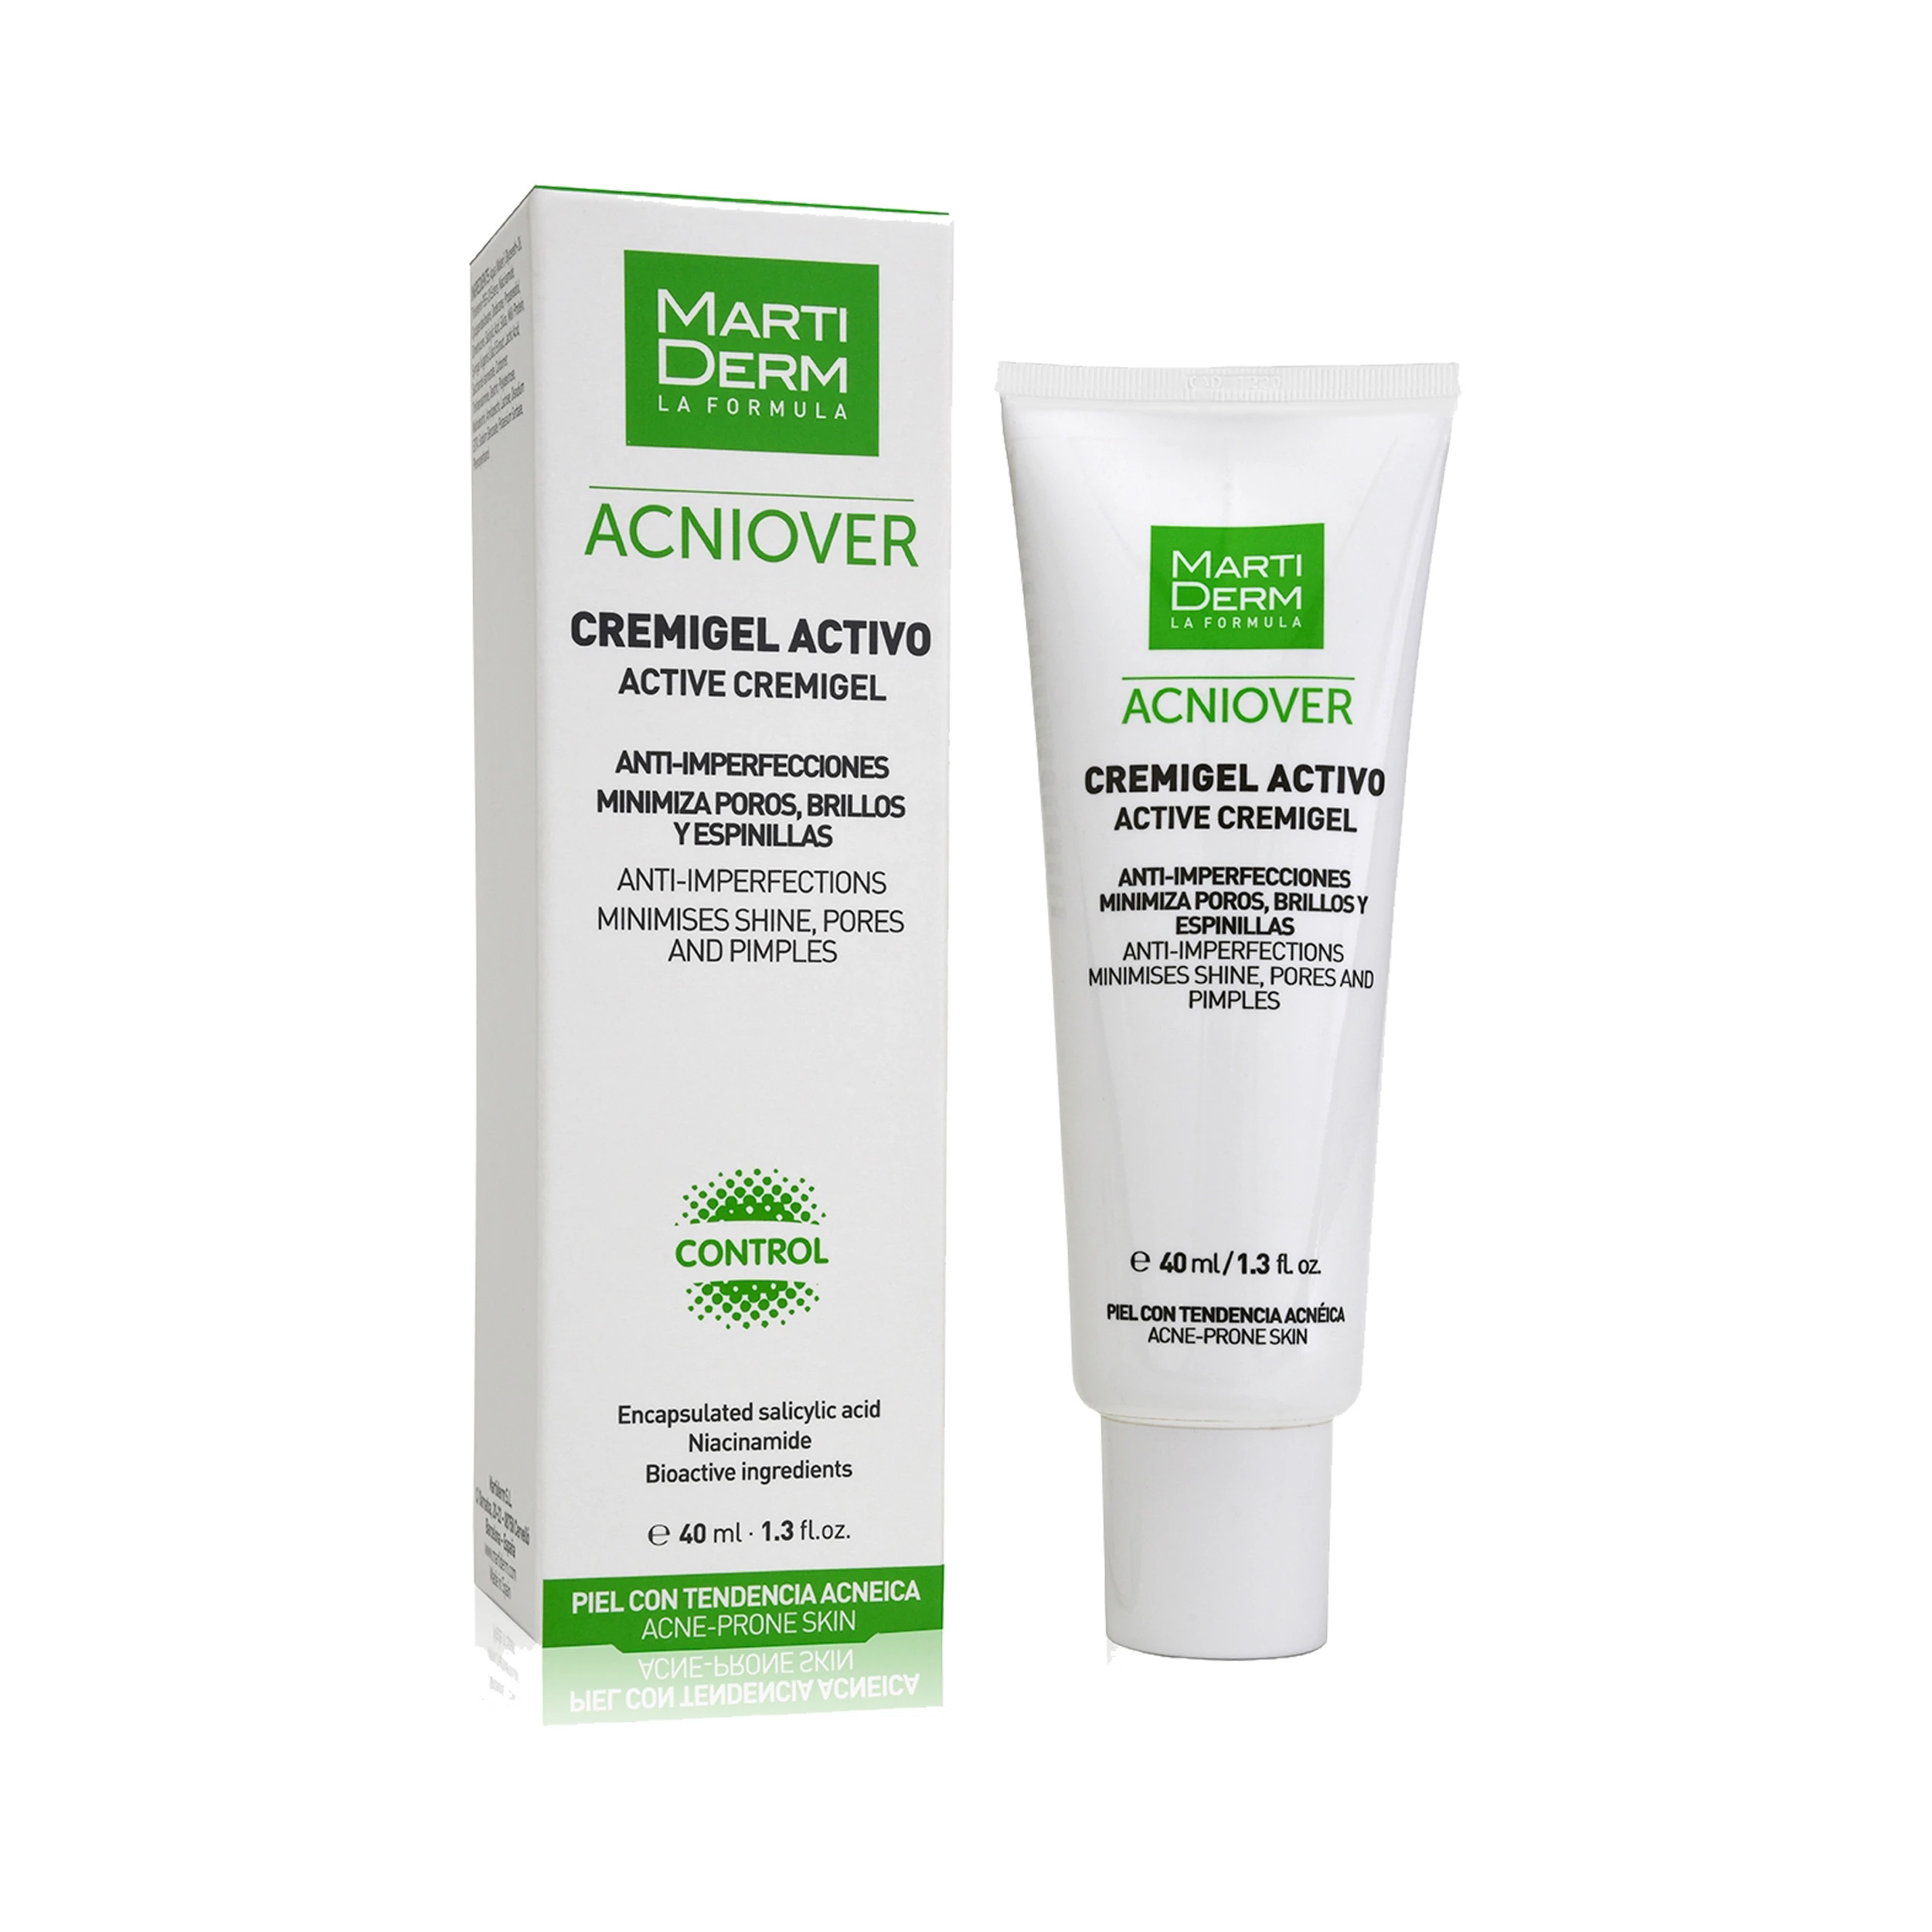 martiderm acniover active cremigel